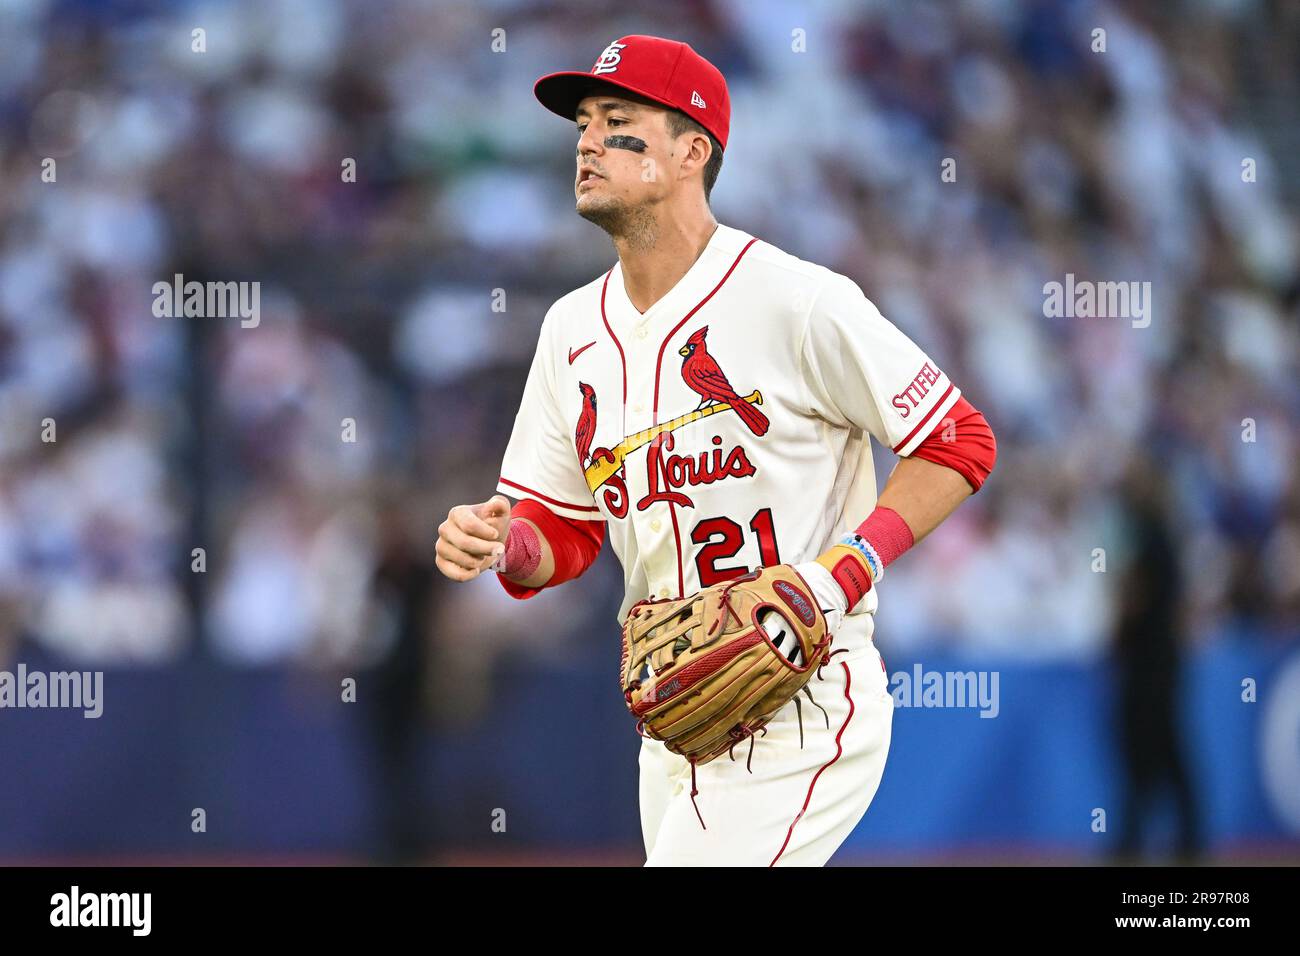 Lars Nootbaar #21 of the St. Louis Cardinals during the 2023 MLB London  Series match St. Louis Cardinals vs Chicago Cubs at London Stadium, London,  United Kingdom, 24th June 2023 (Photo by